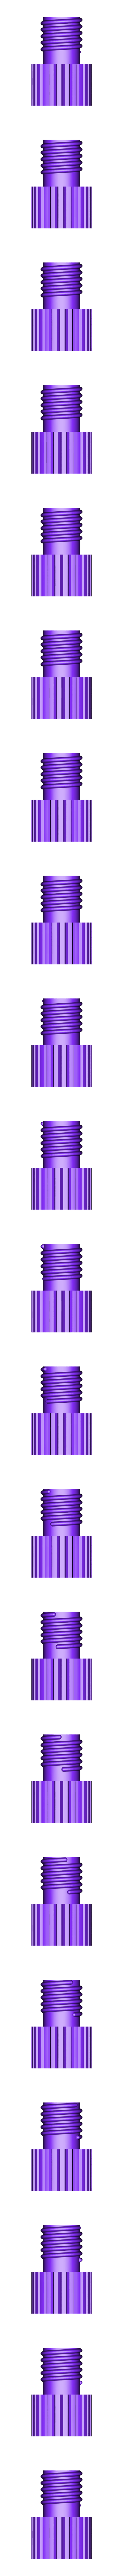 a27mm.stl Download free STL file Modular Cylindrical Connectors with Hardware • 3D printing design, Churuata3D